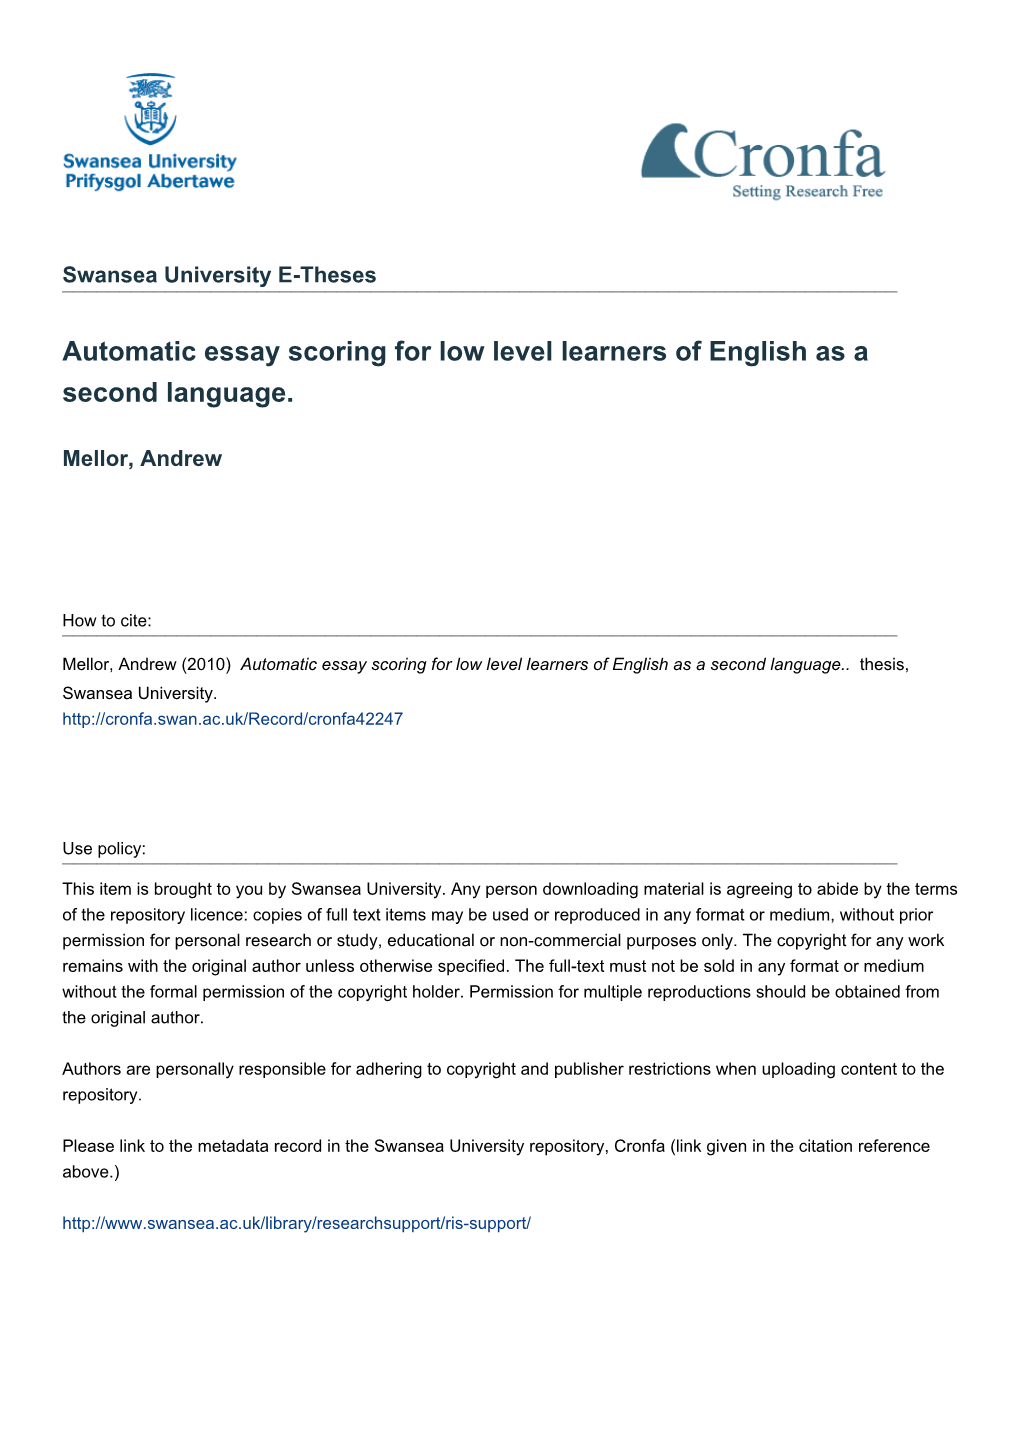 Automatic Essay Scoring for Low Level Learners of English As a Second Language